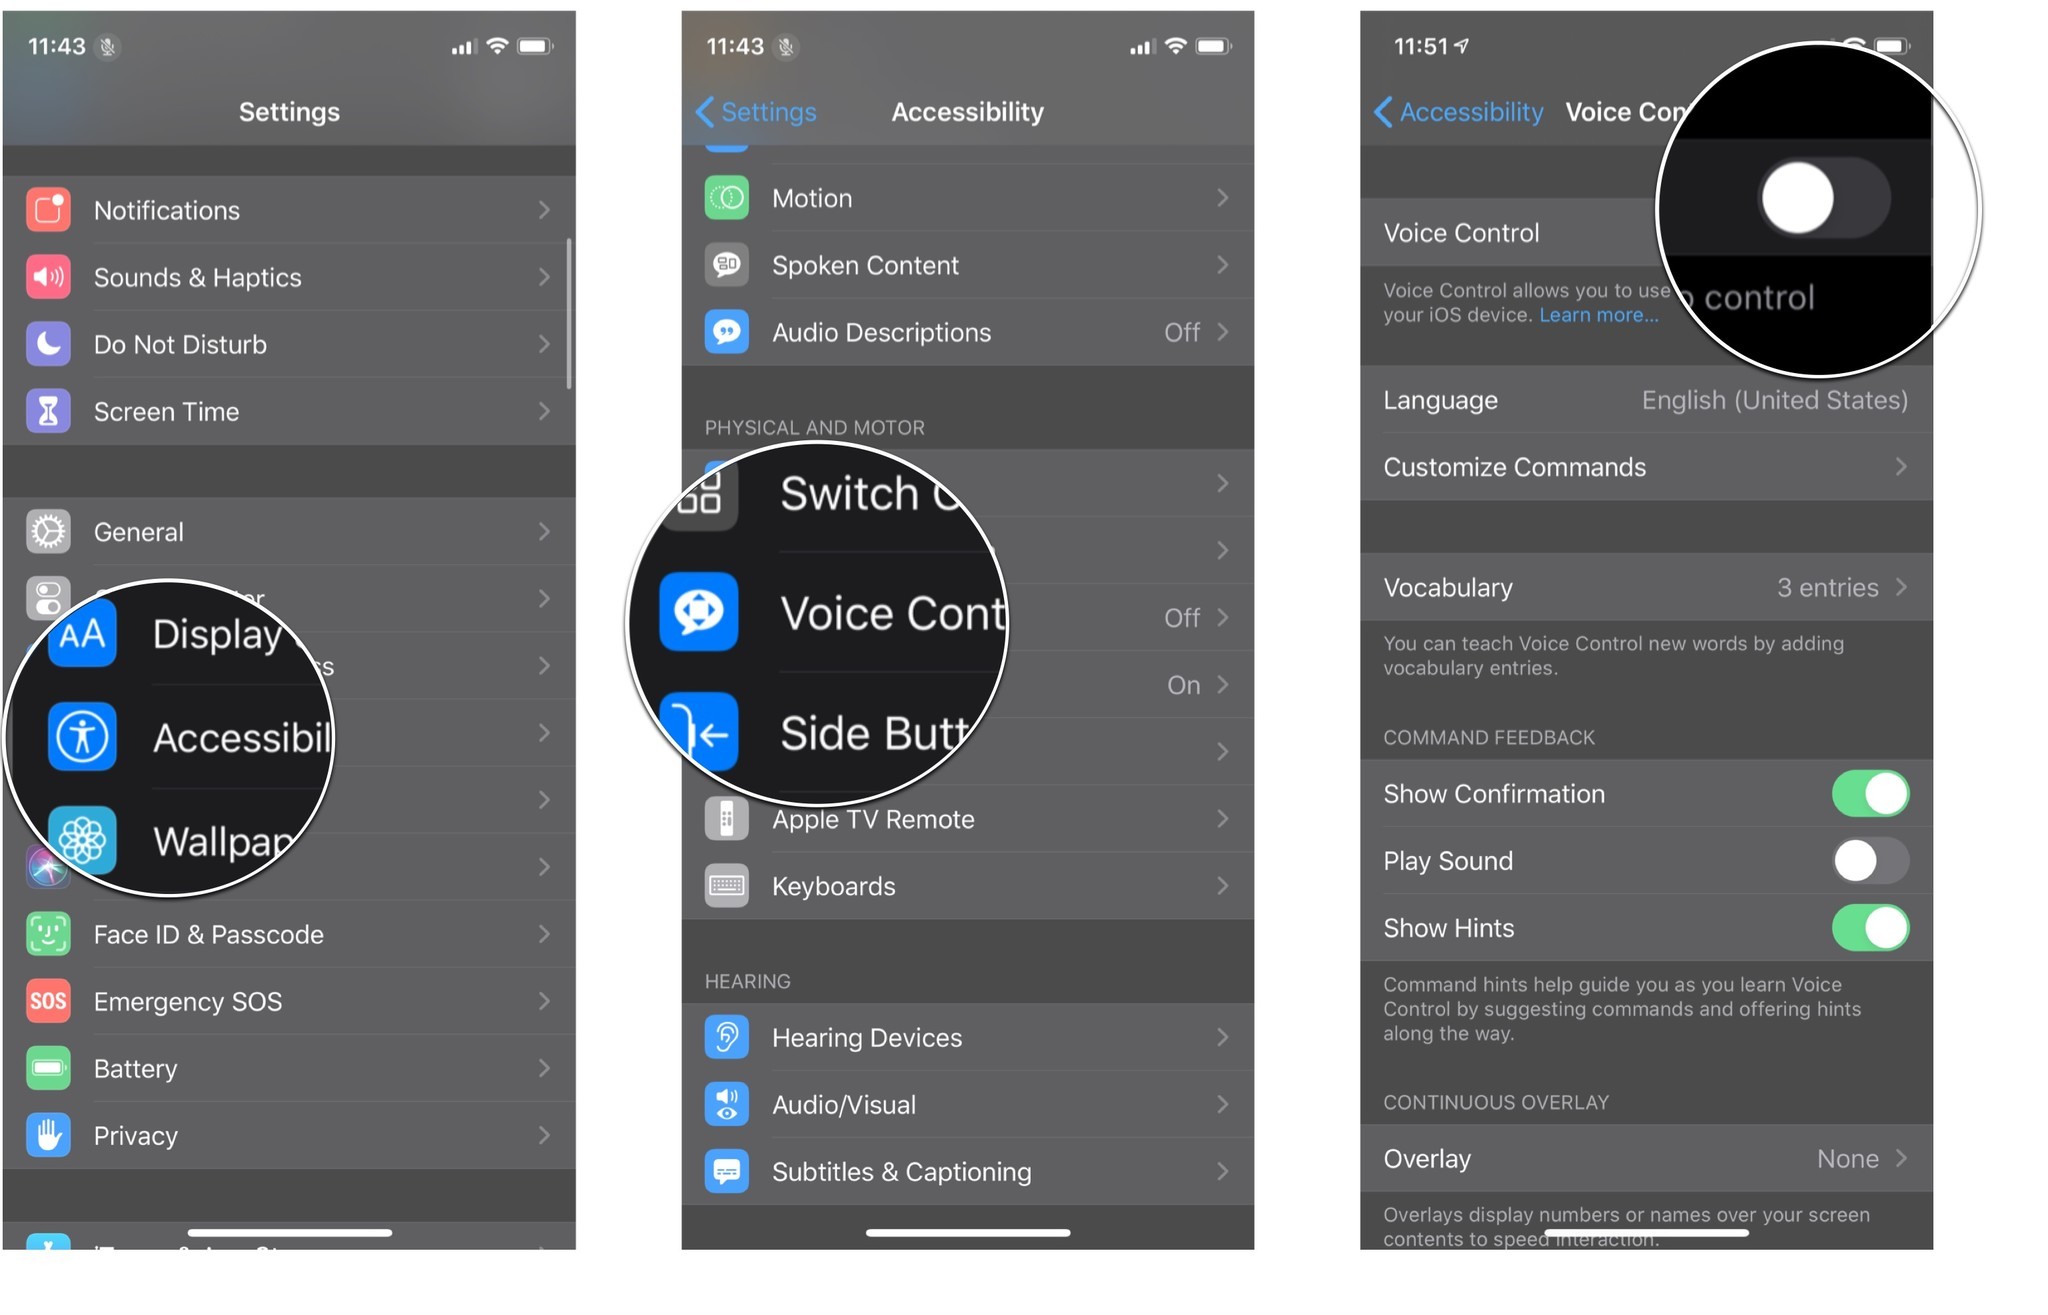 Turning on Voice Control: Launch Settings, tap Acessibility, tap Voice Control, and the tap the On/Off switch.